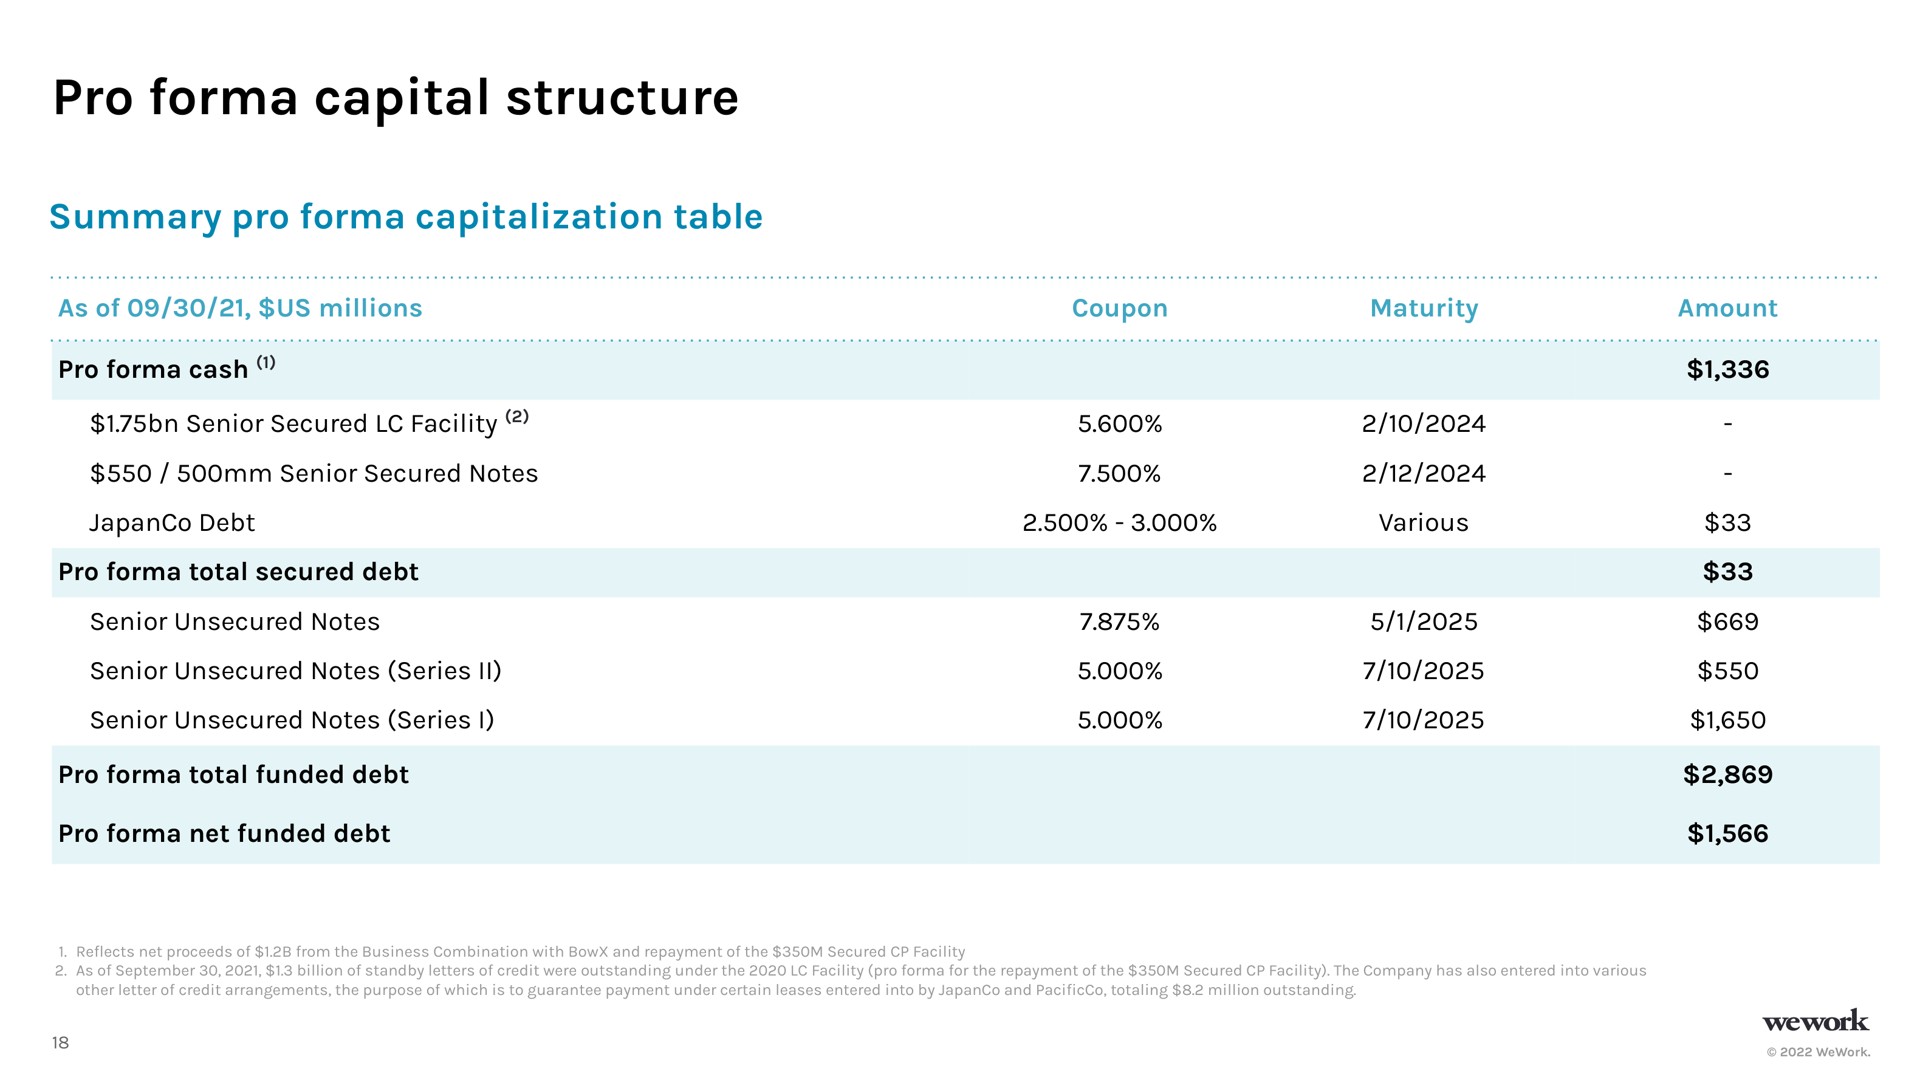 pro capital structure summary pro capitalization table | WeWork